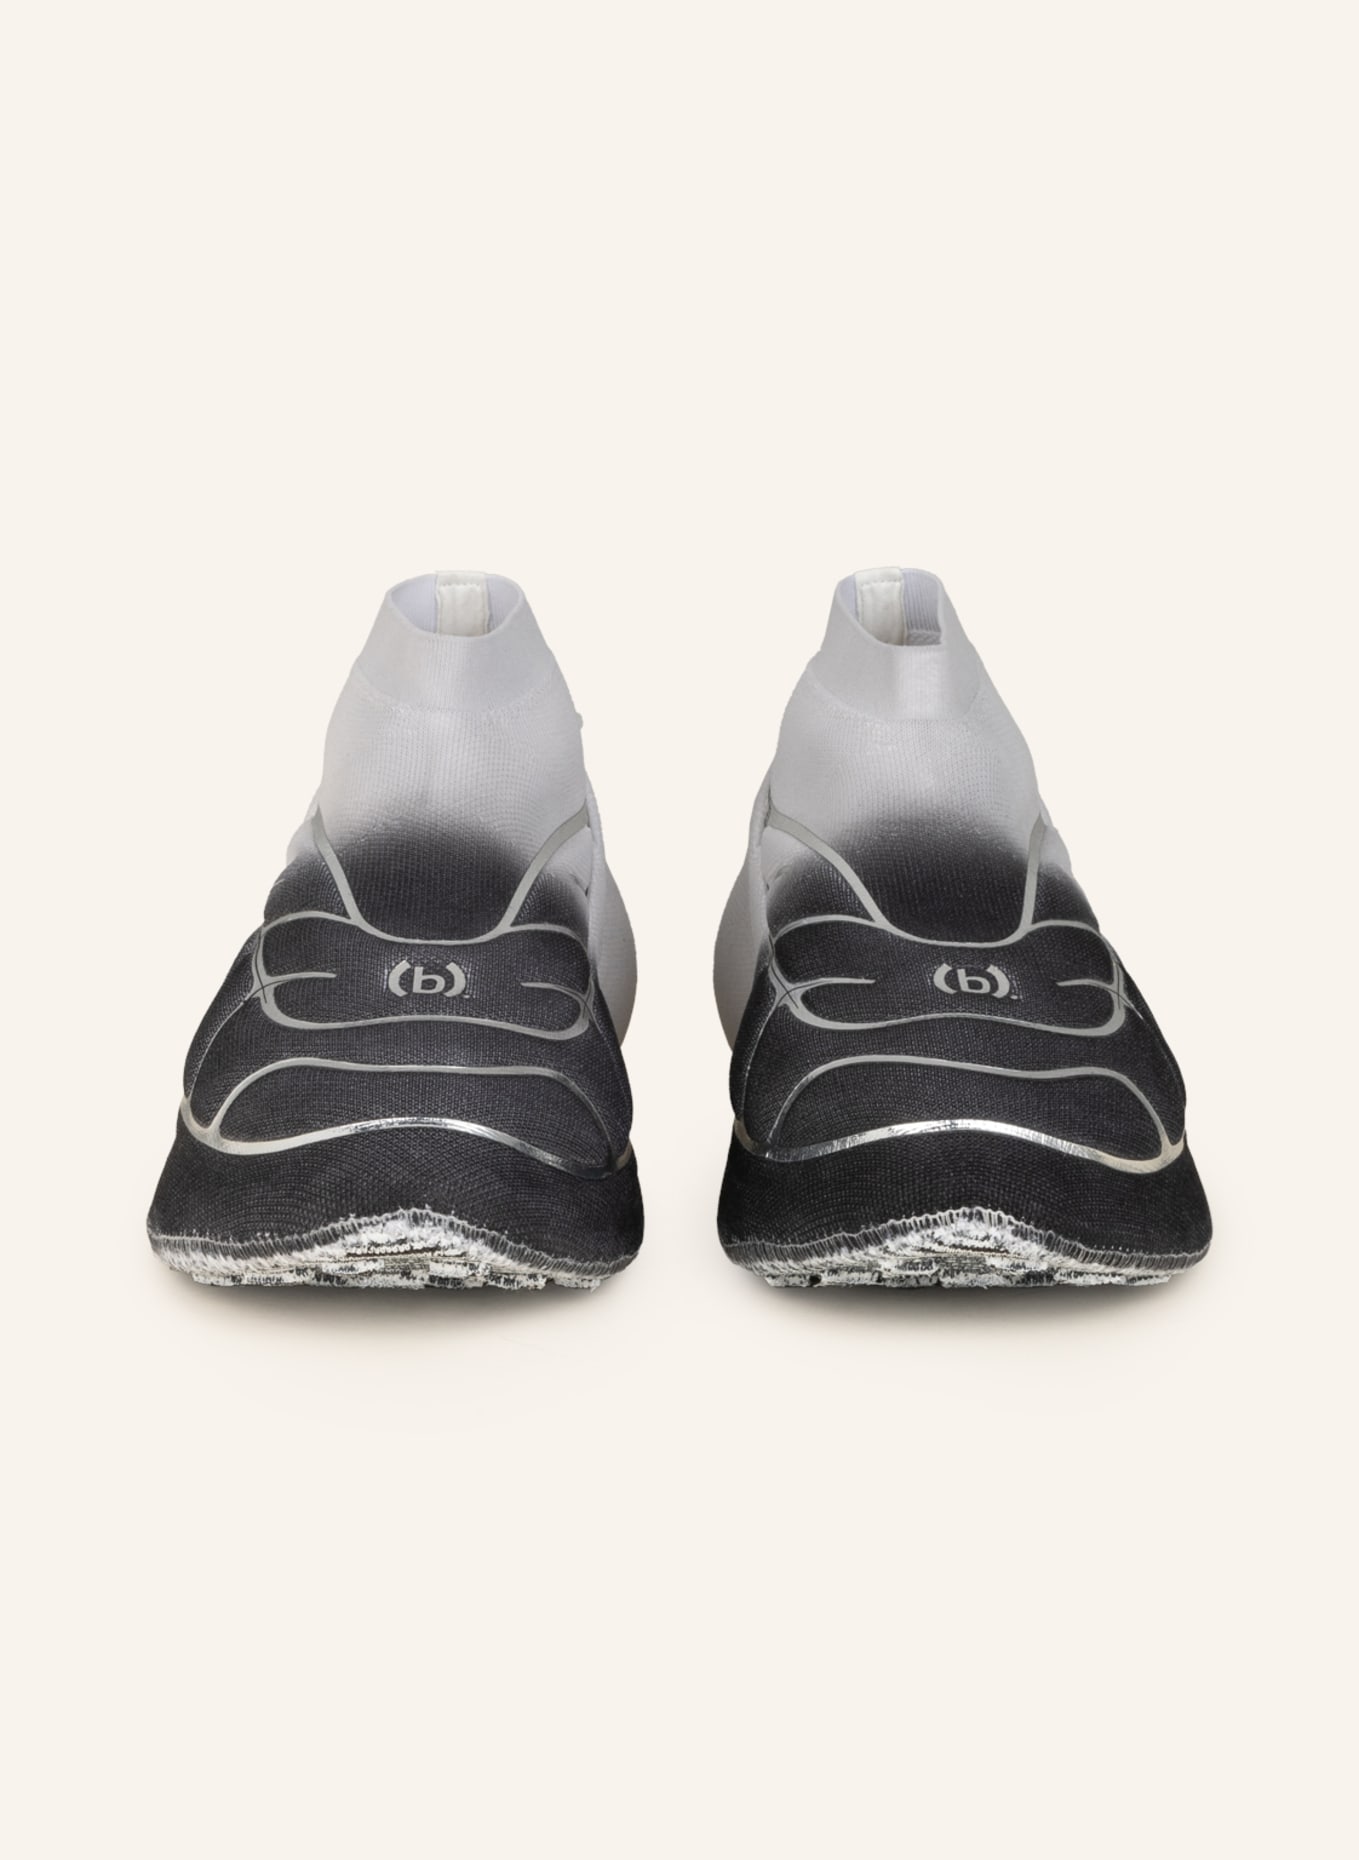 GIVENCHY Sneakers TK-360 PLUS, Color: SILVER/ LIGHT GRAY/ DARK GRAY (Image 3)